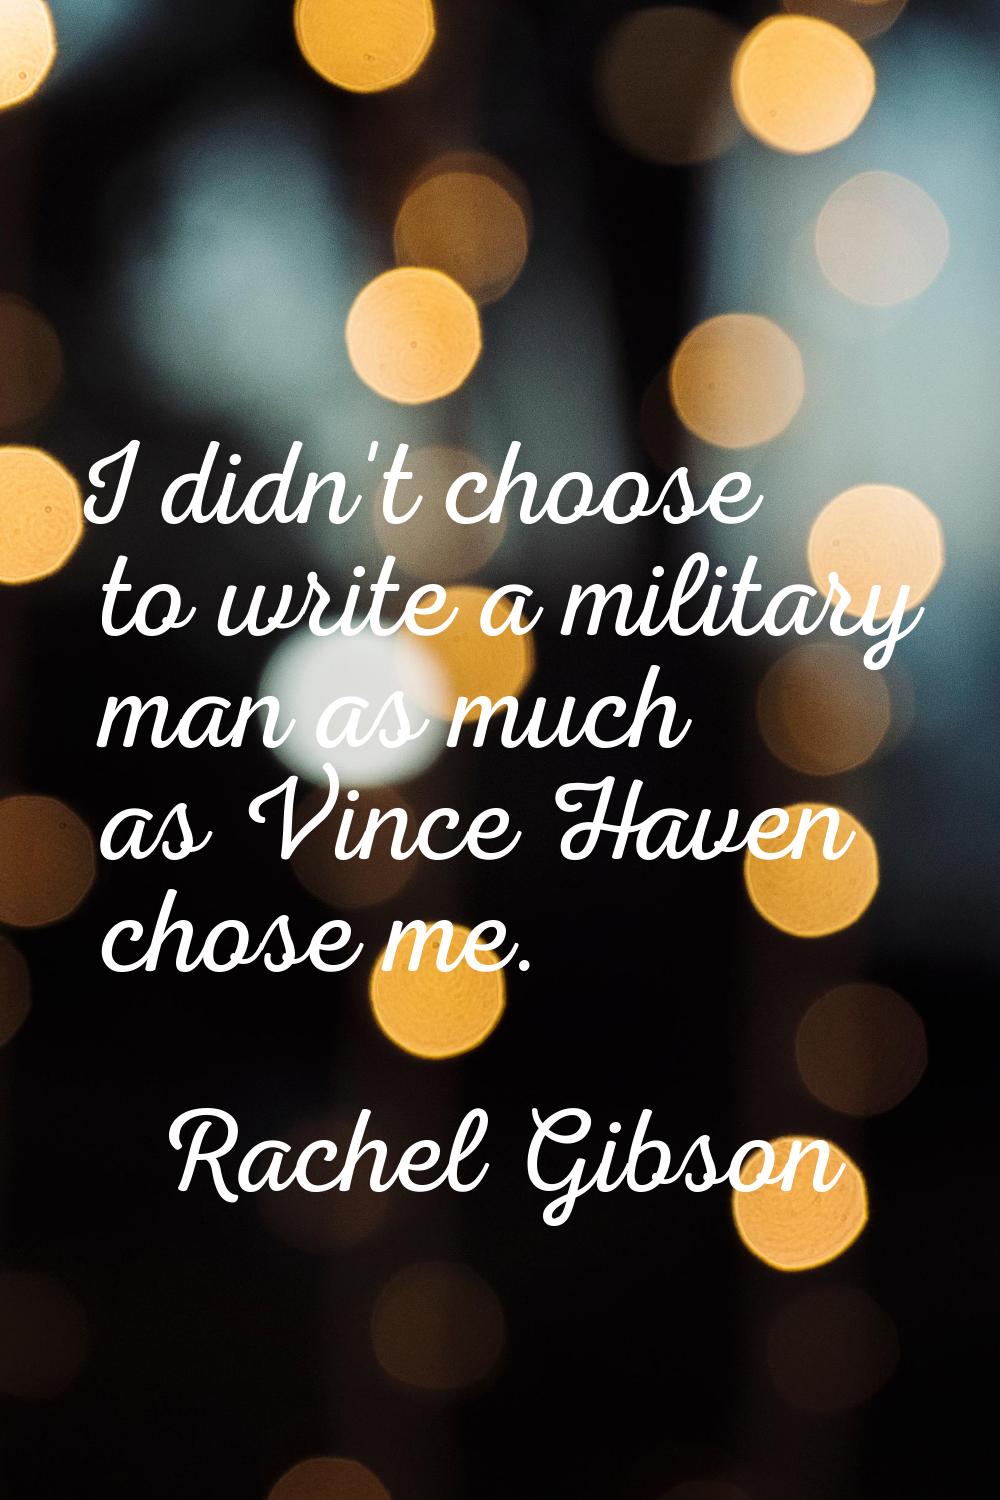 I didn't choose to write a military man as much as Vince Haven chose me.